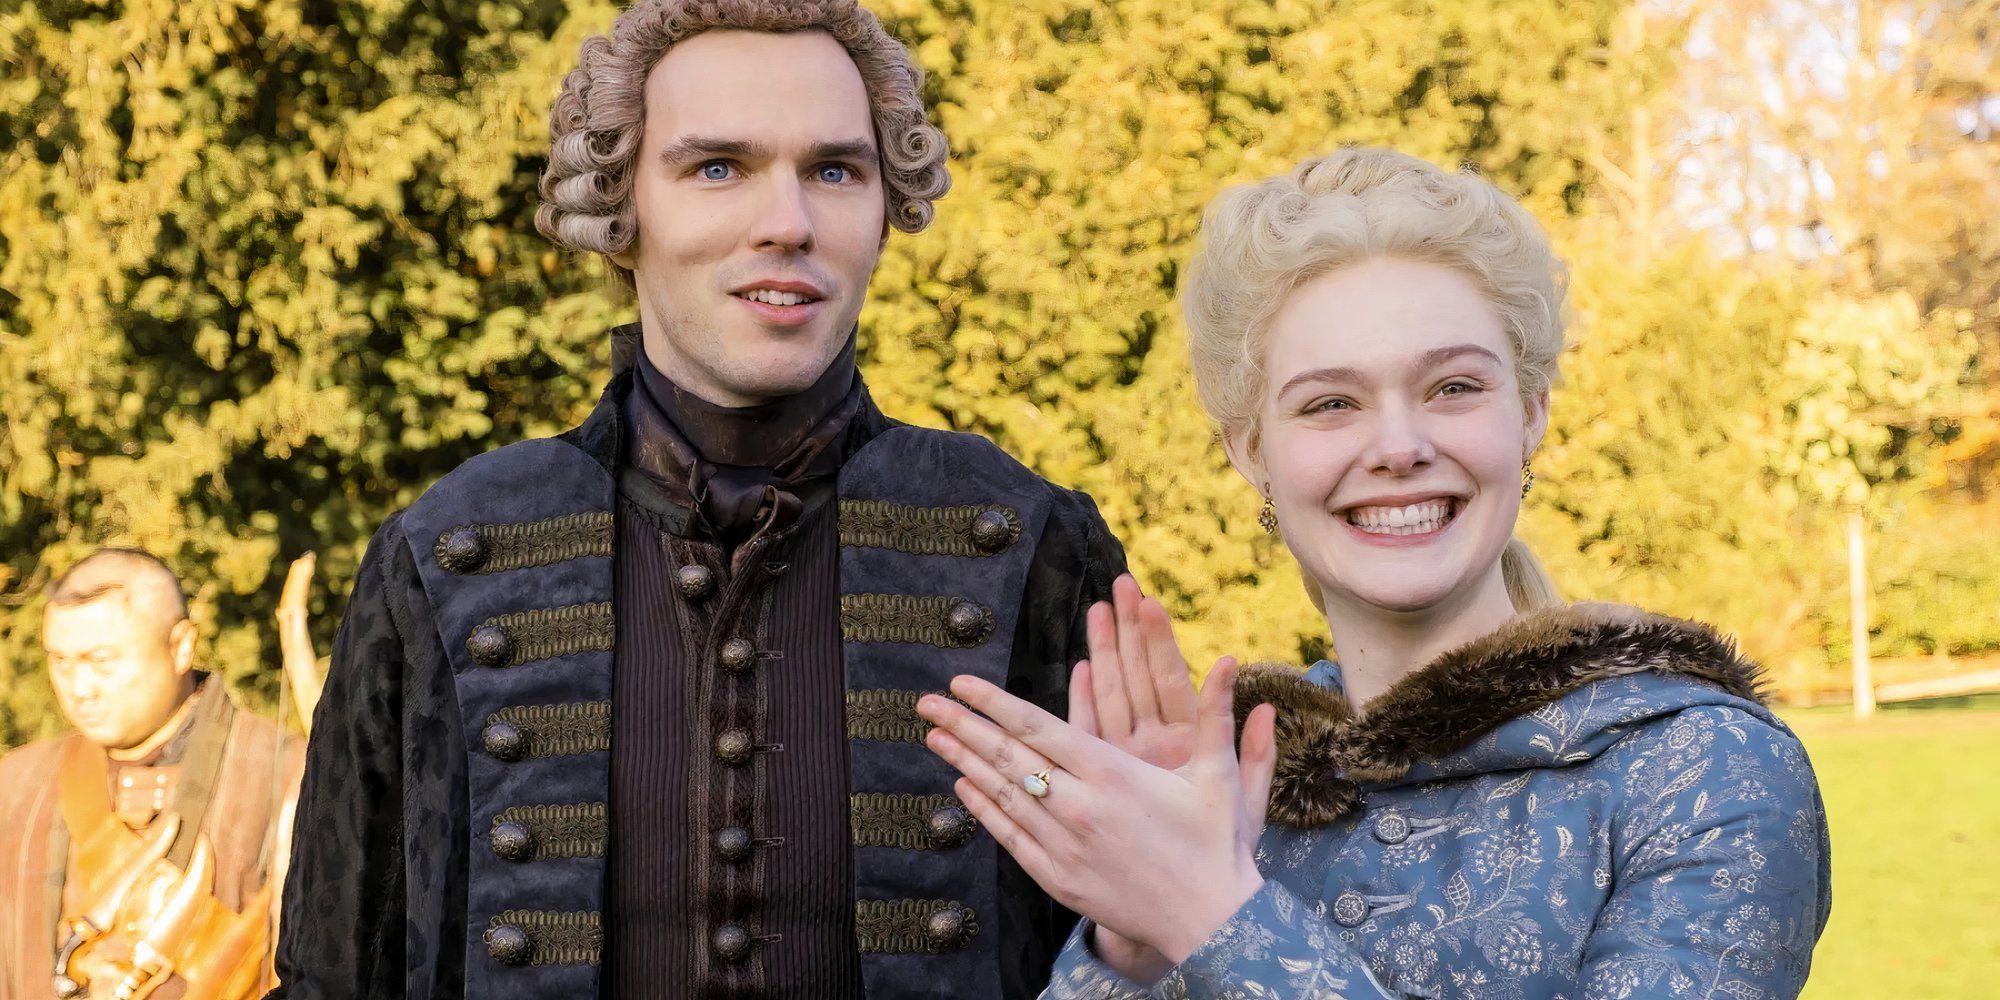 Peter smiling and Catherine clapping in The Great